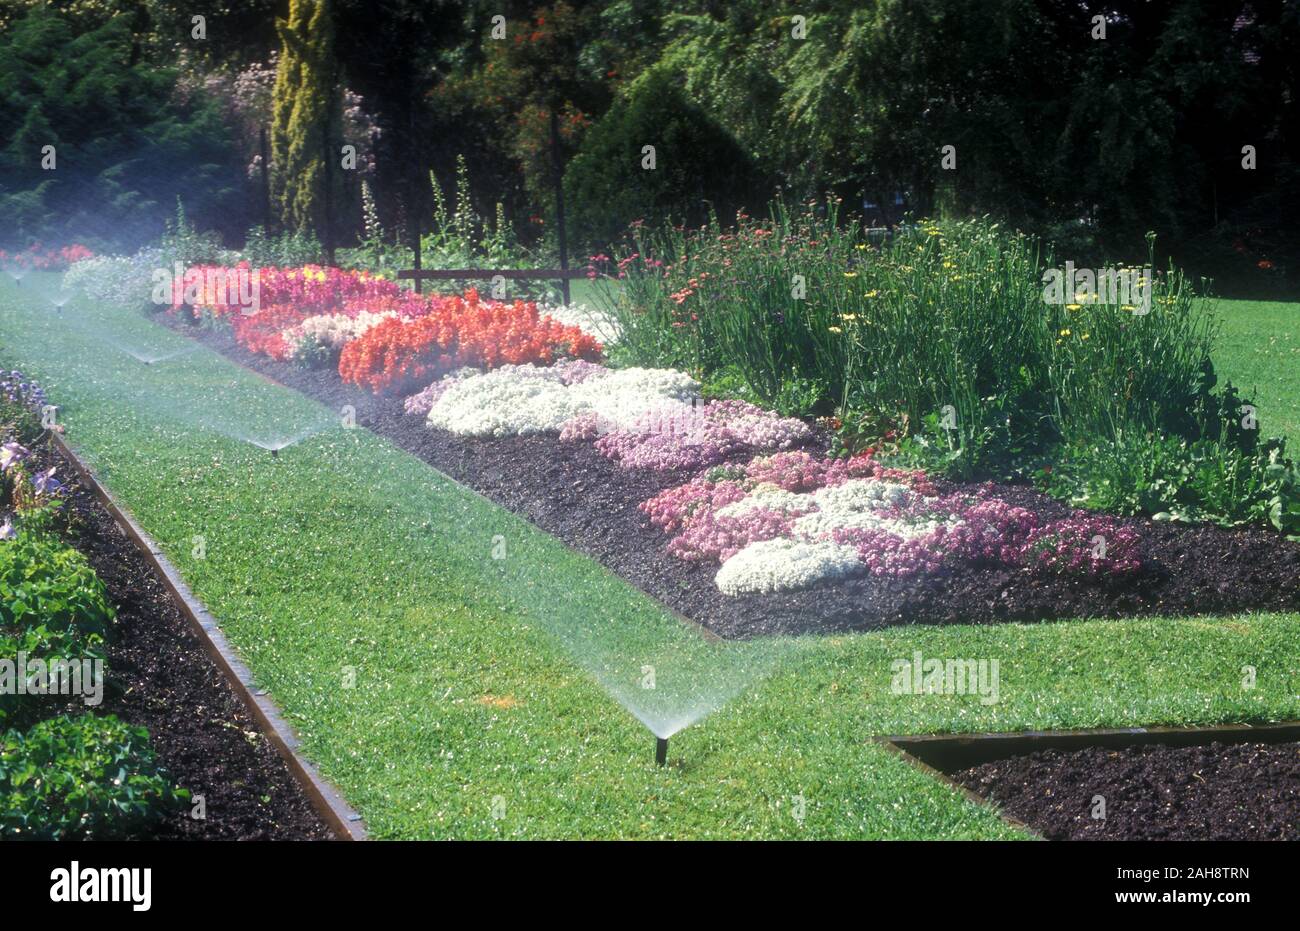 AUTOMATIC WATERING SYSTEM WATERS GARDEN BEDS AND LAWN Stock Photo